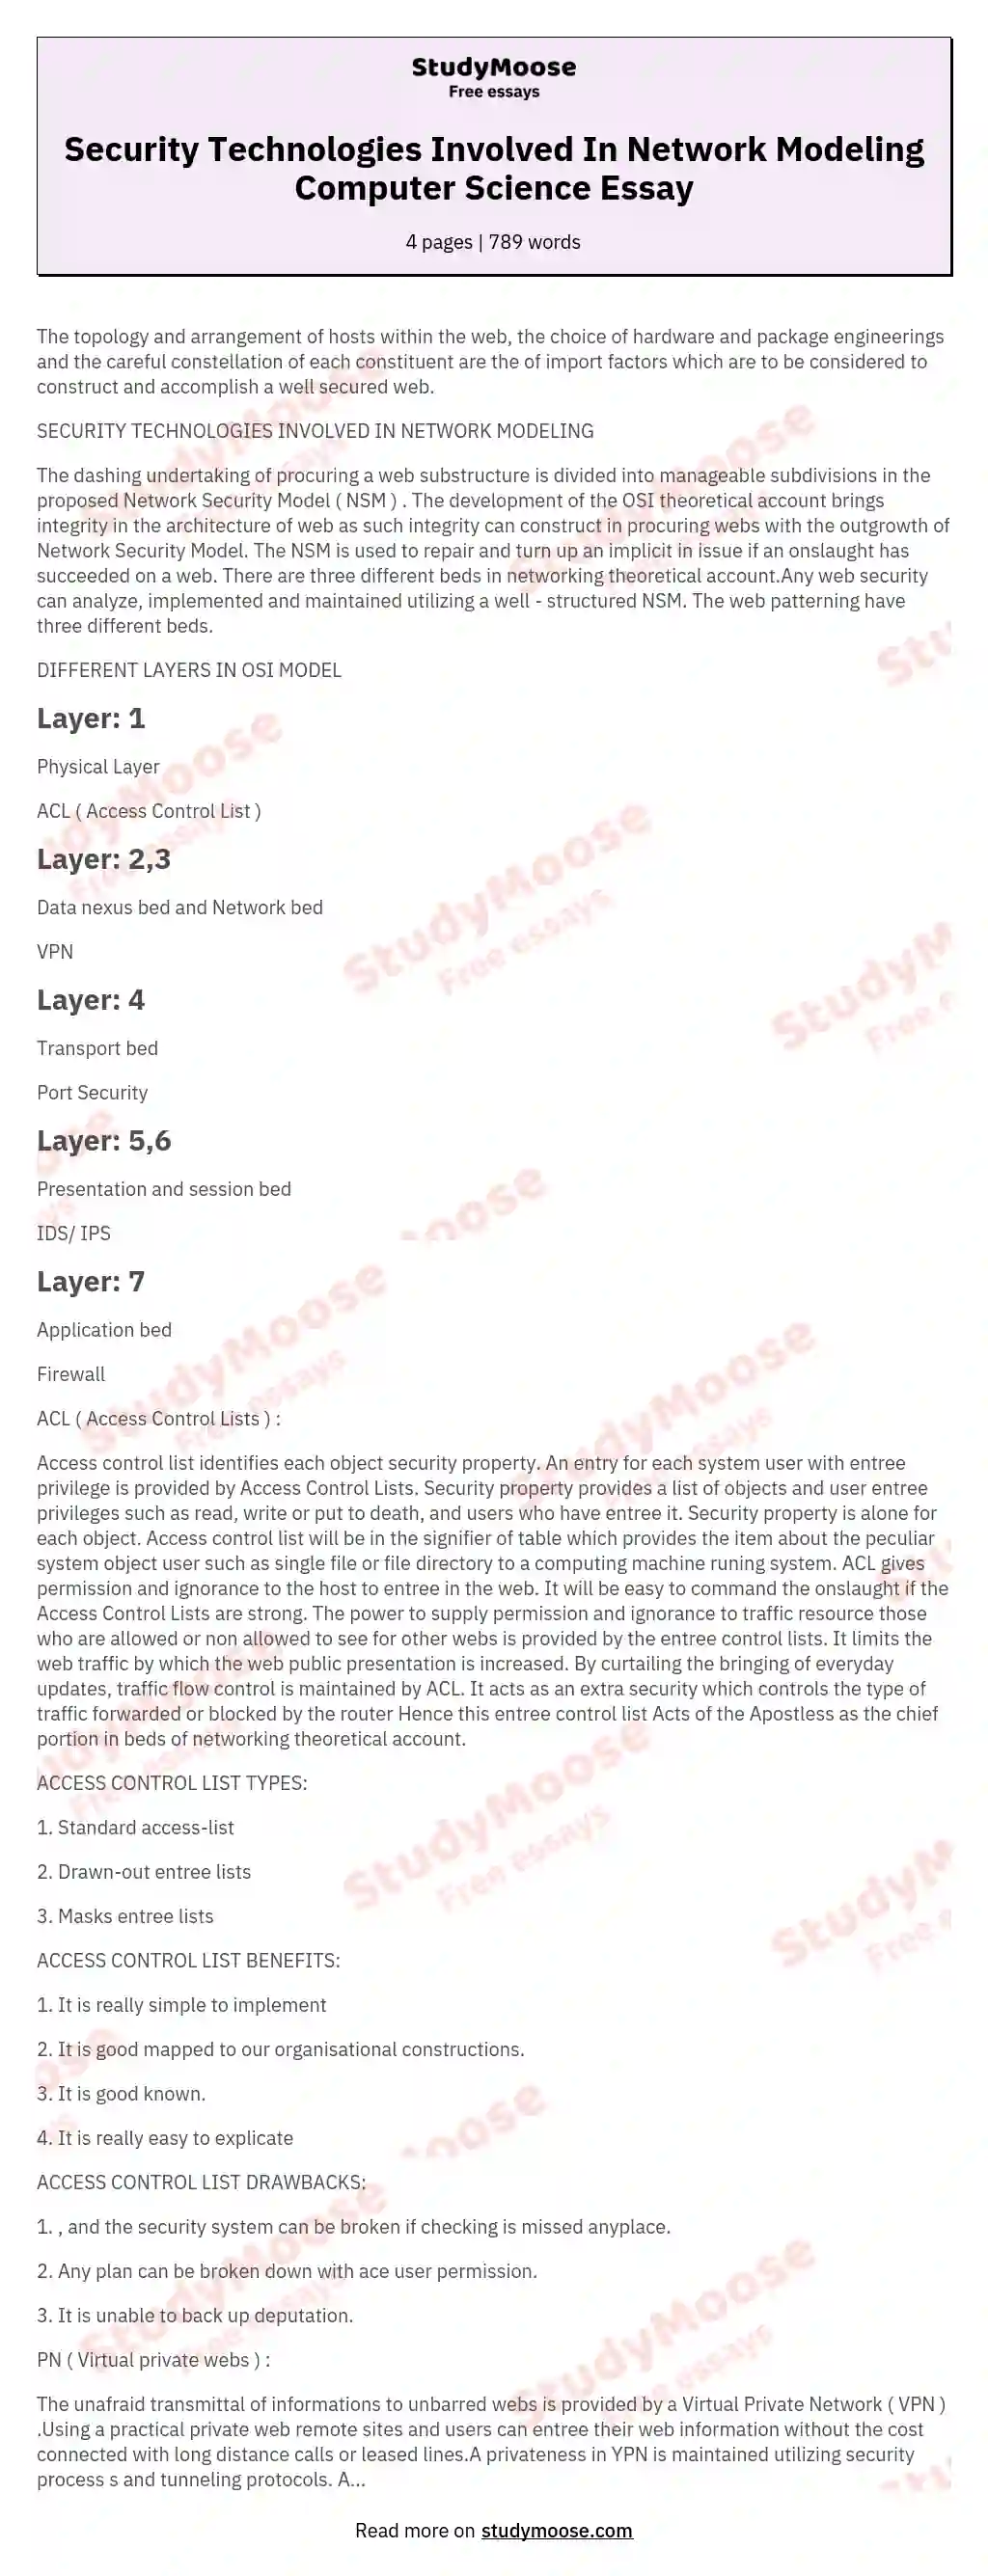 Security Technologies Involved In Network Modeling Computer Science Essay essay